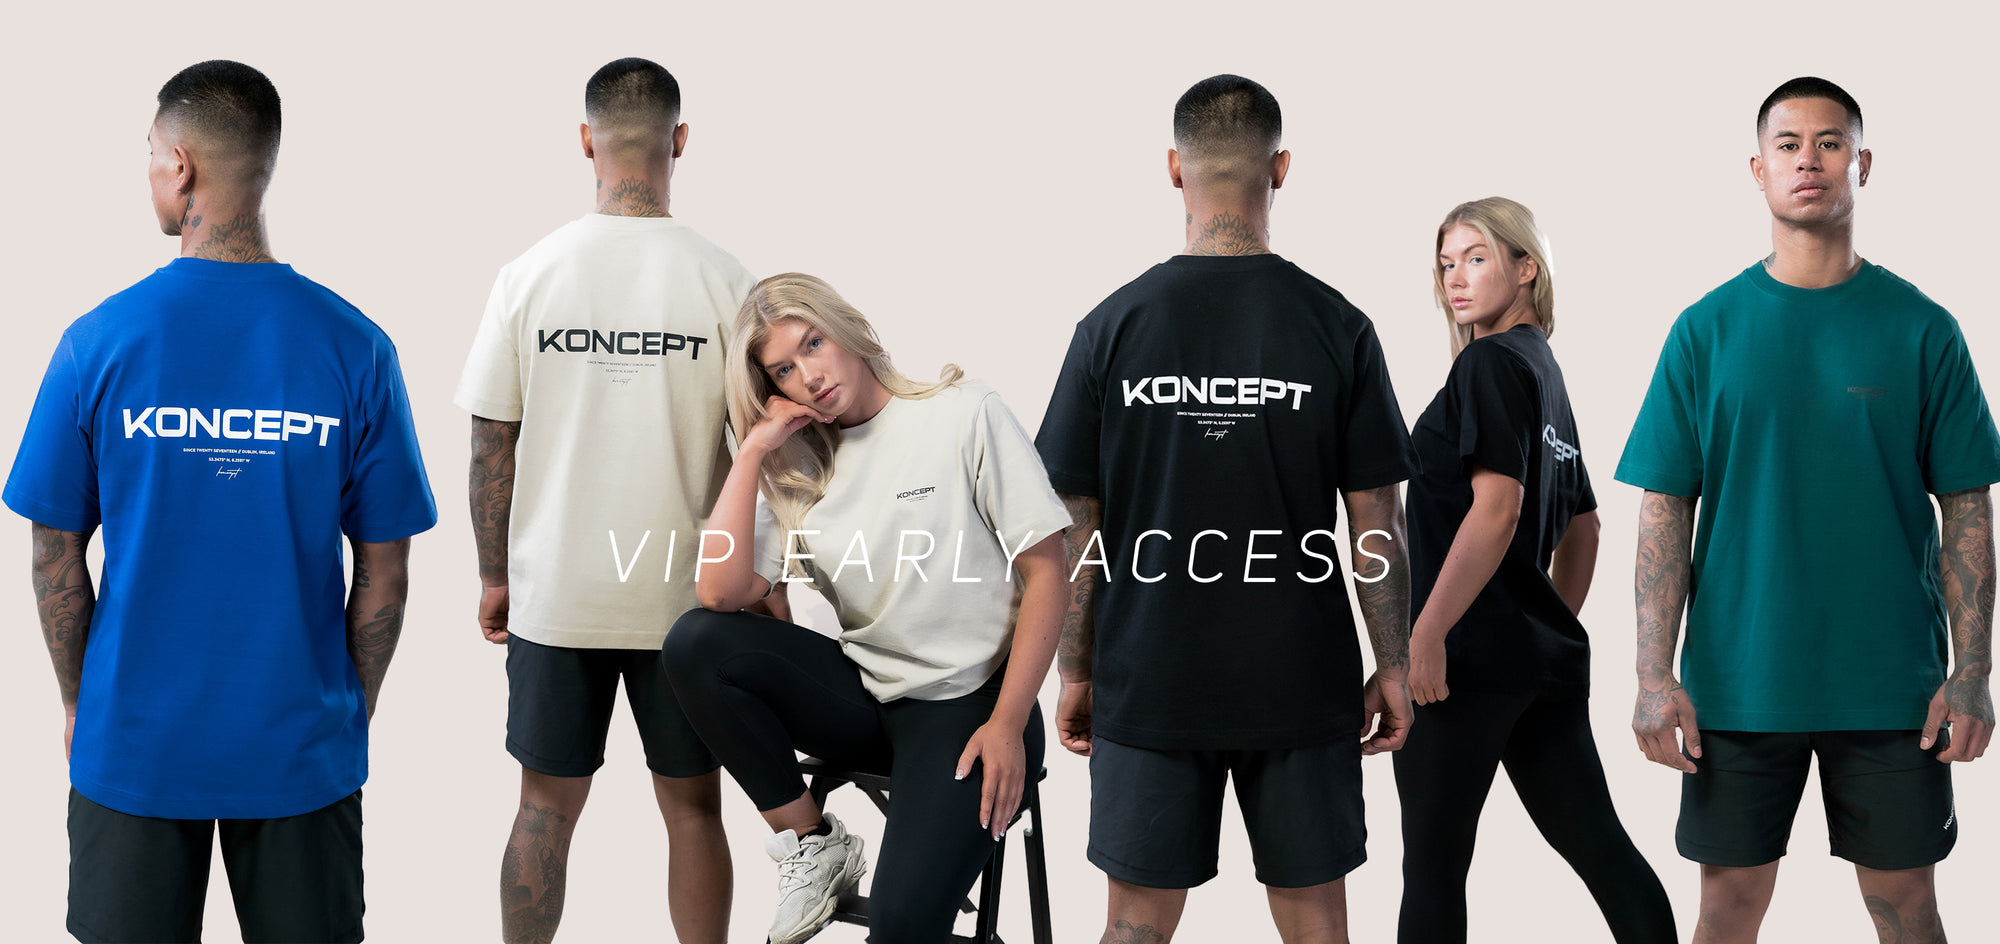 VIP Early Access